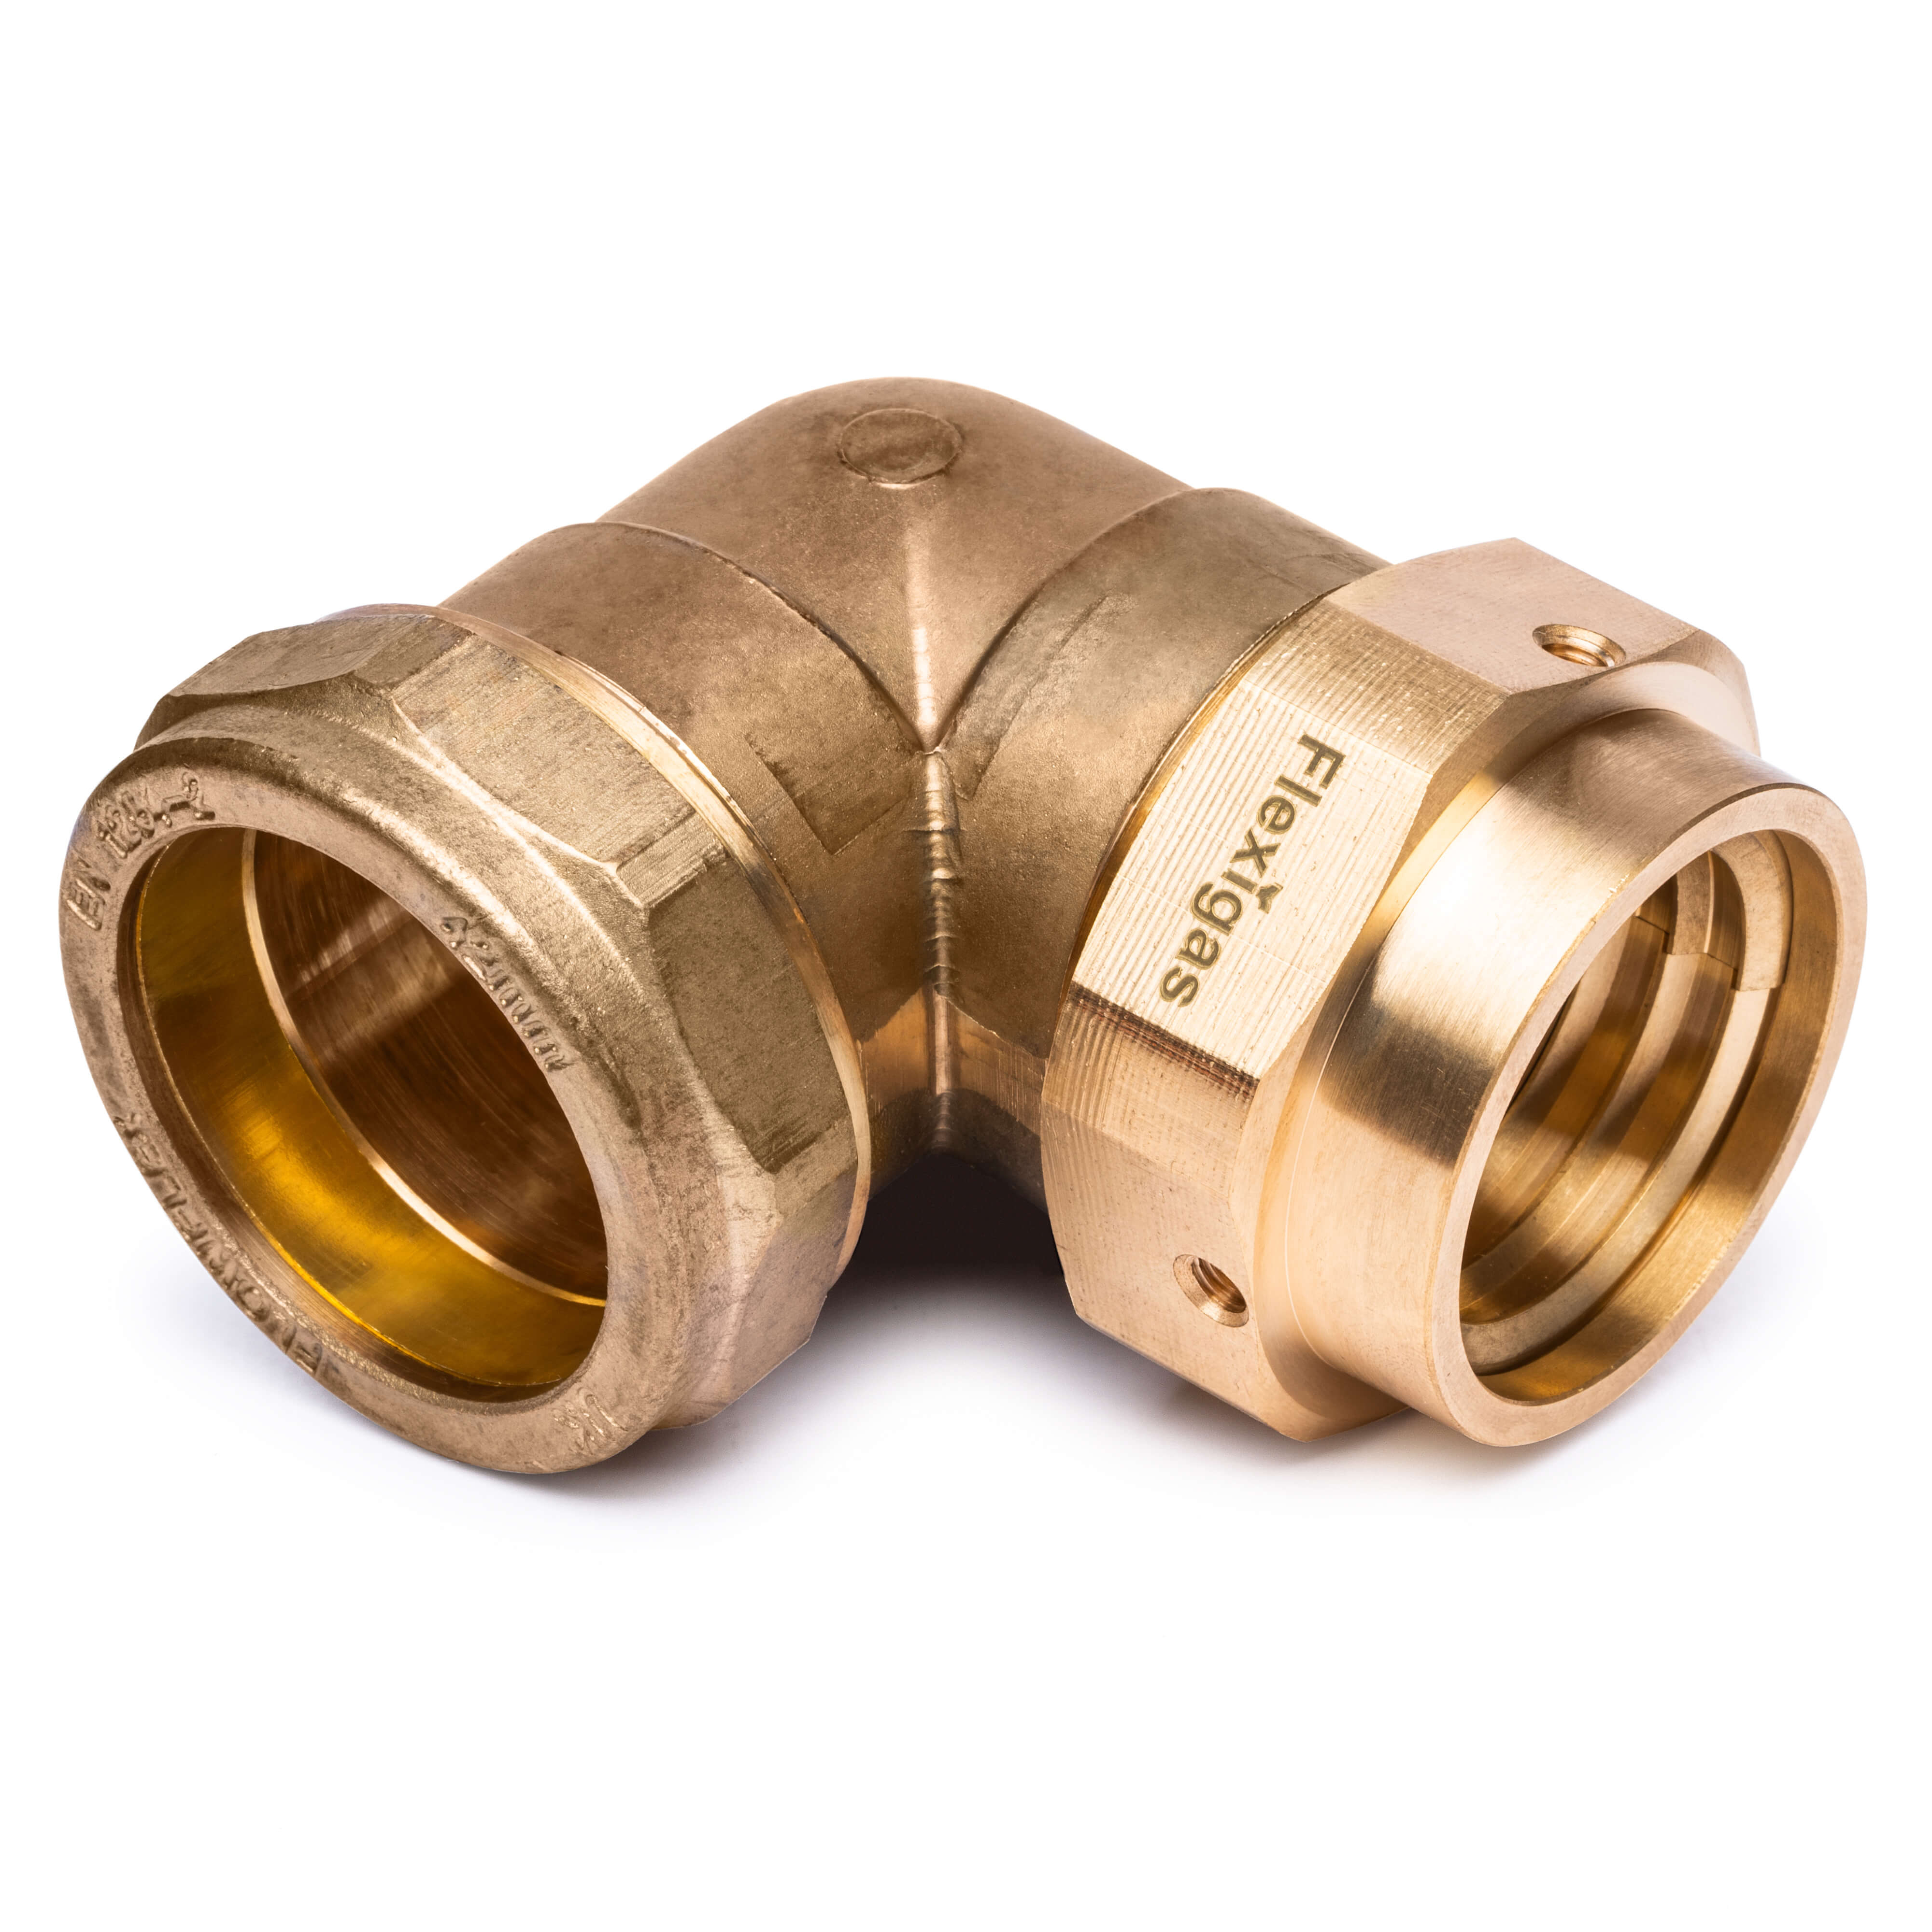 FlexiGas to Copper Connector Compression Fittings 15x15 28x28 22x22 